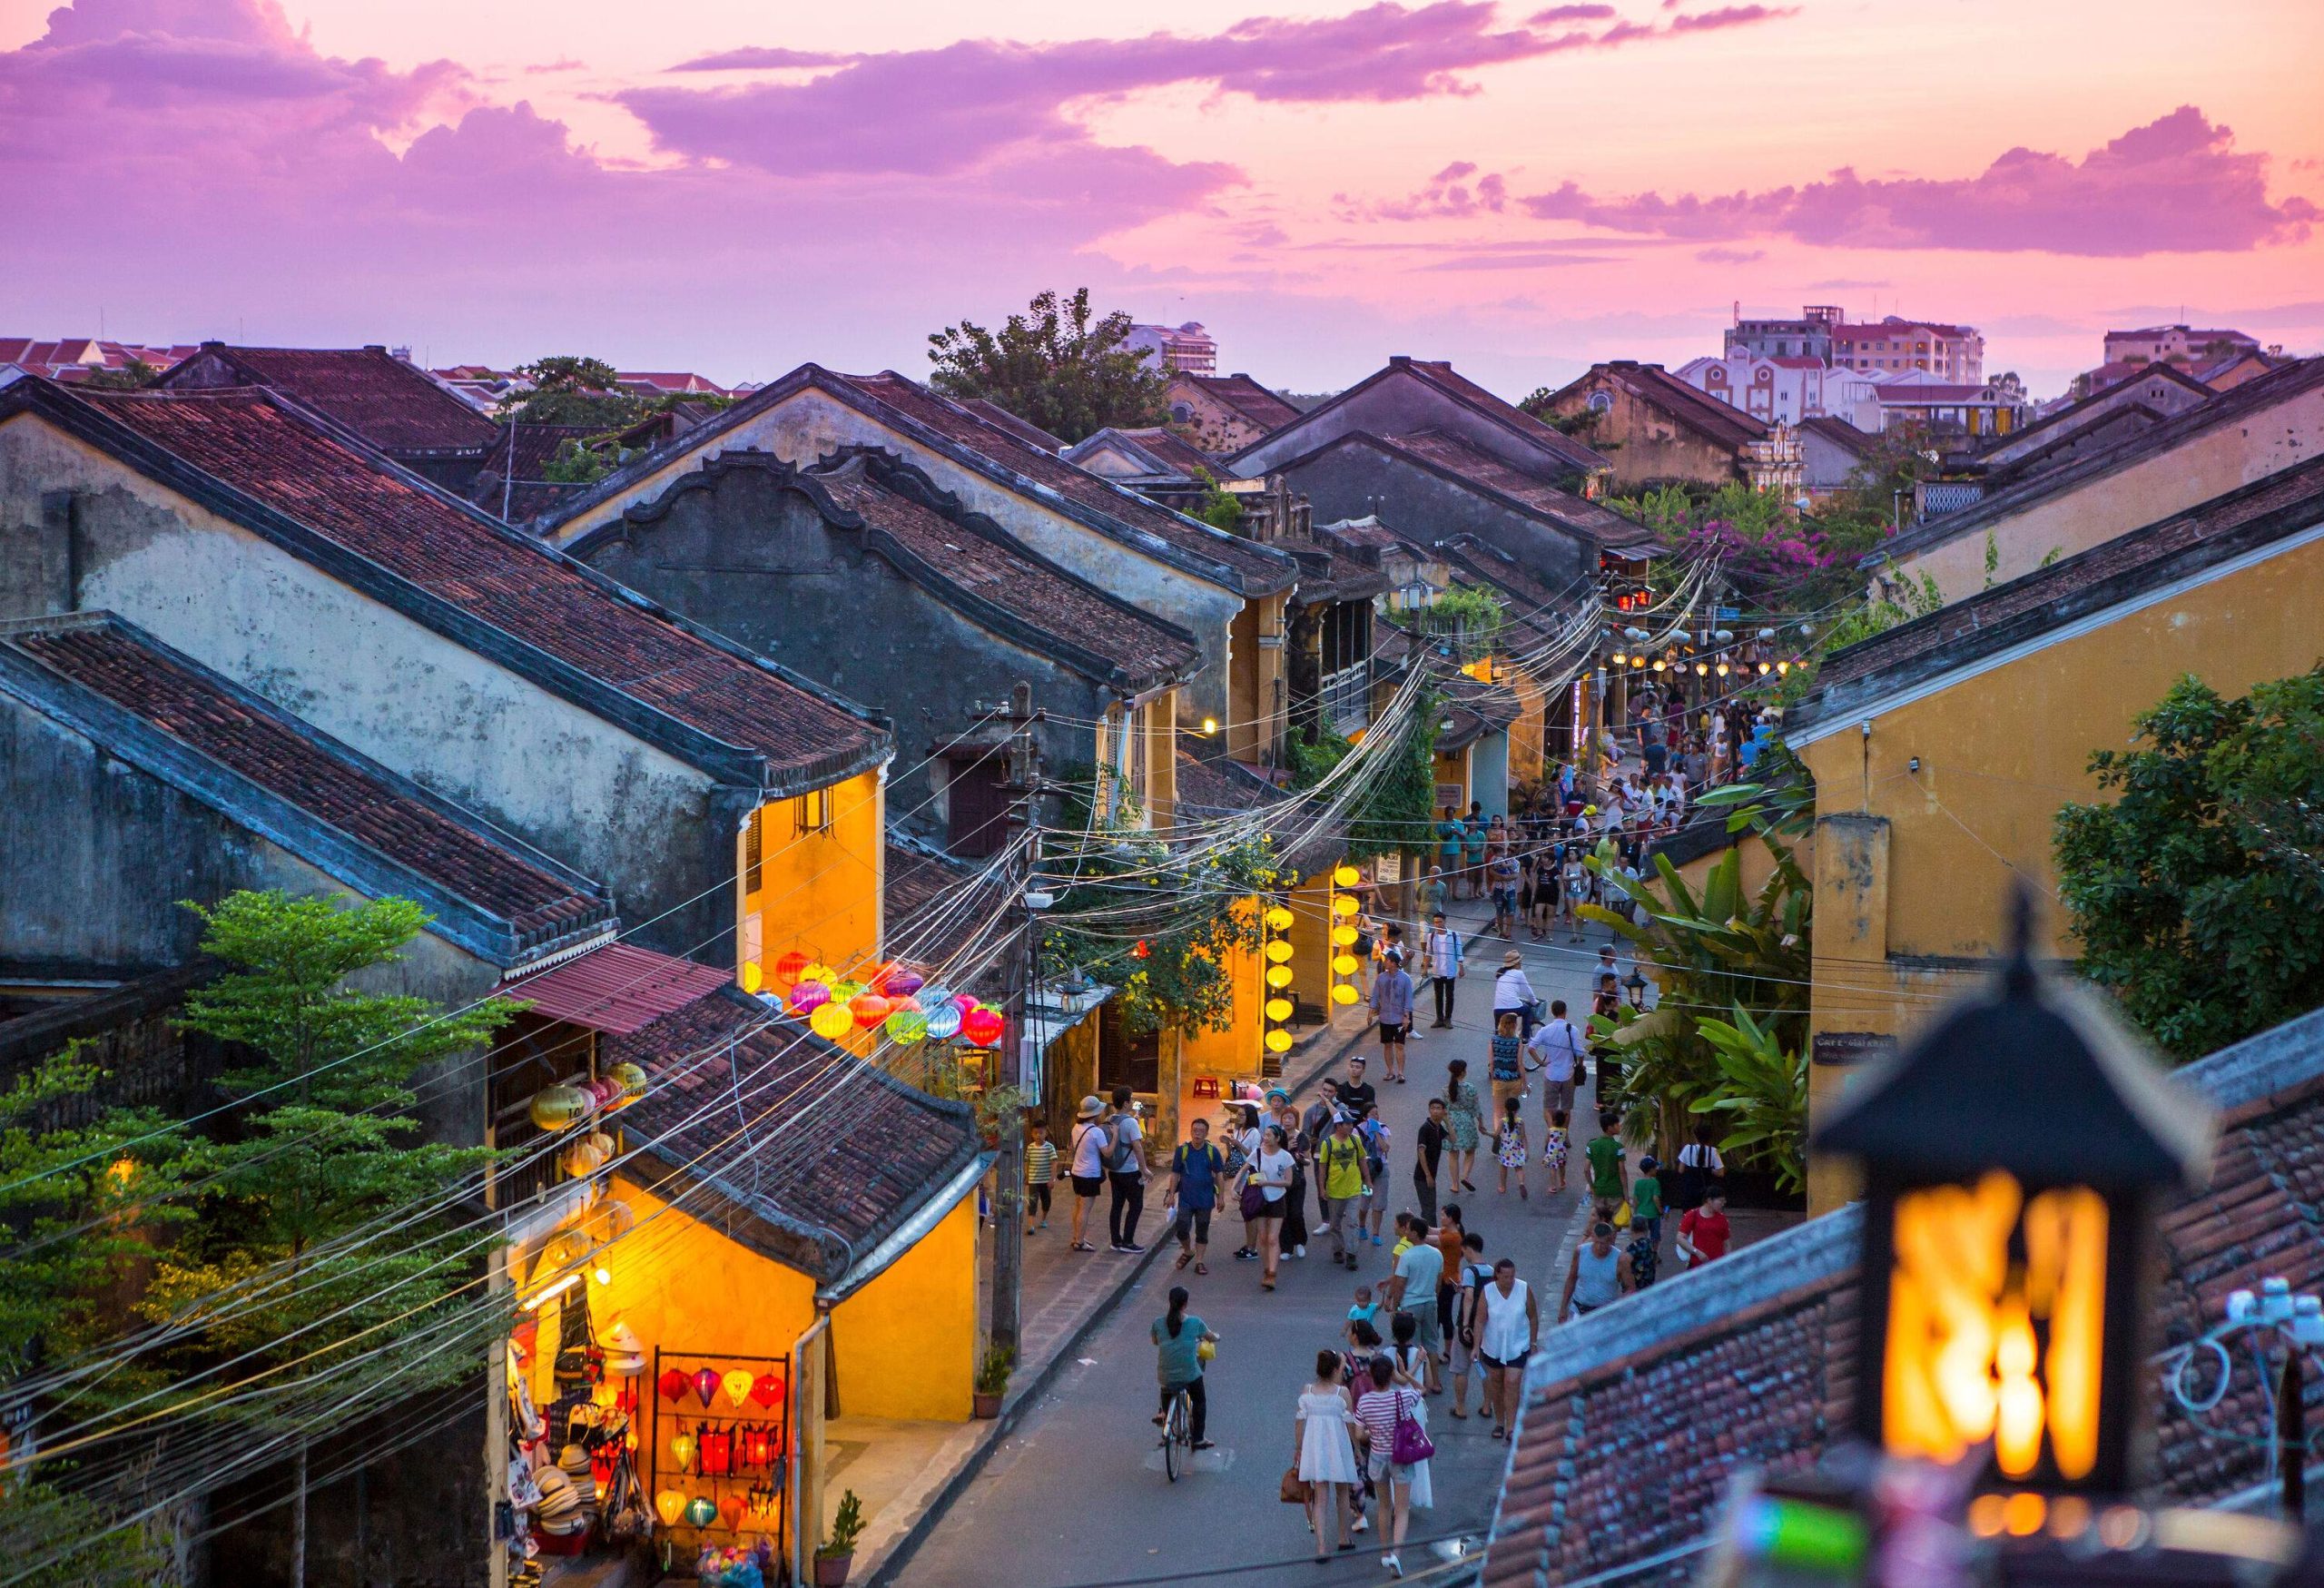 A lively street with people strolling along a charming thoroughfare, flanked by colourful houses adorned with paper lanterns, and an inviting array of shops and vendors along the way.